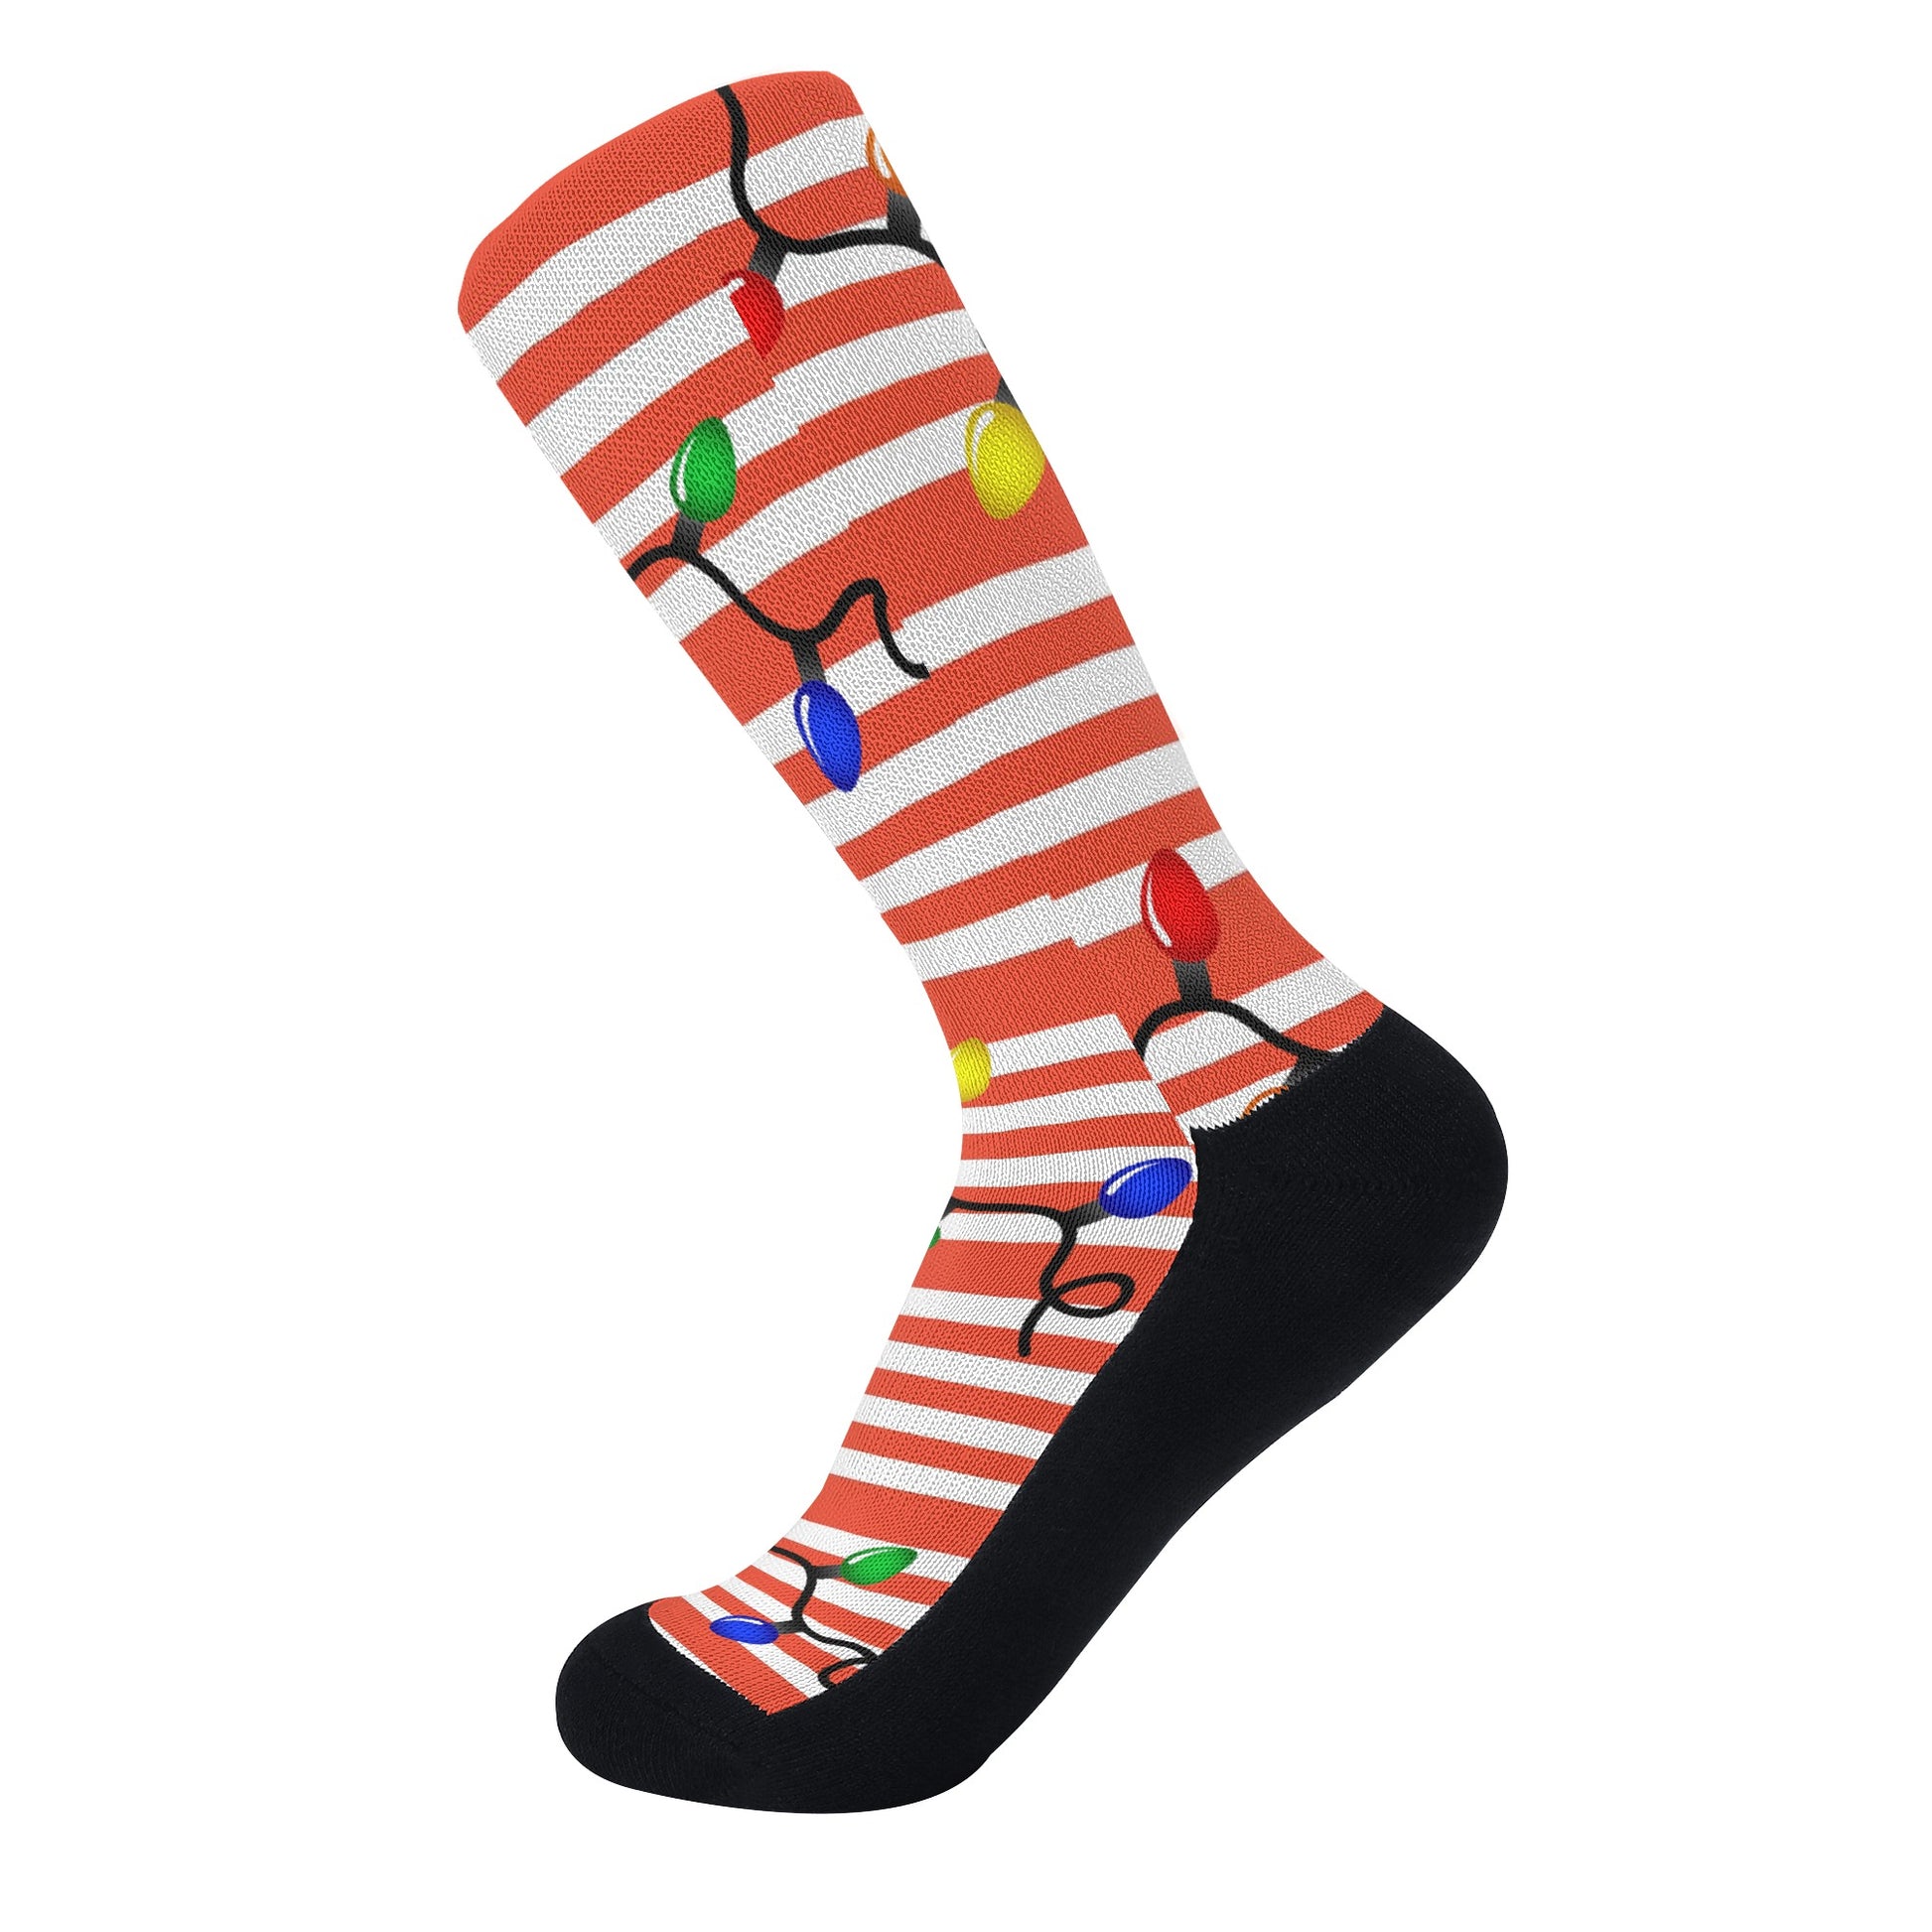 Stand out  with the  Nuggmas Crew Socks  available at Hey Nugget. Grab yours today!